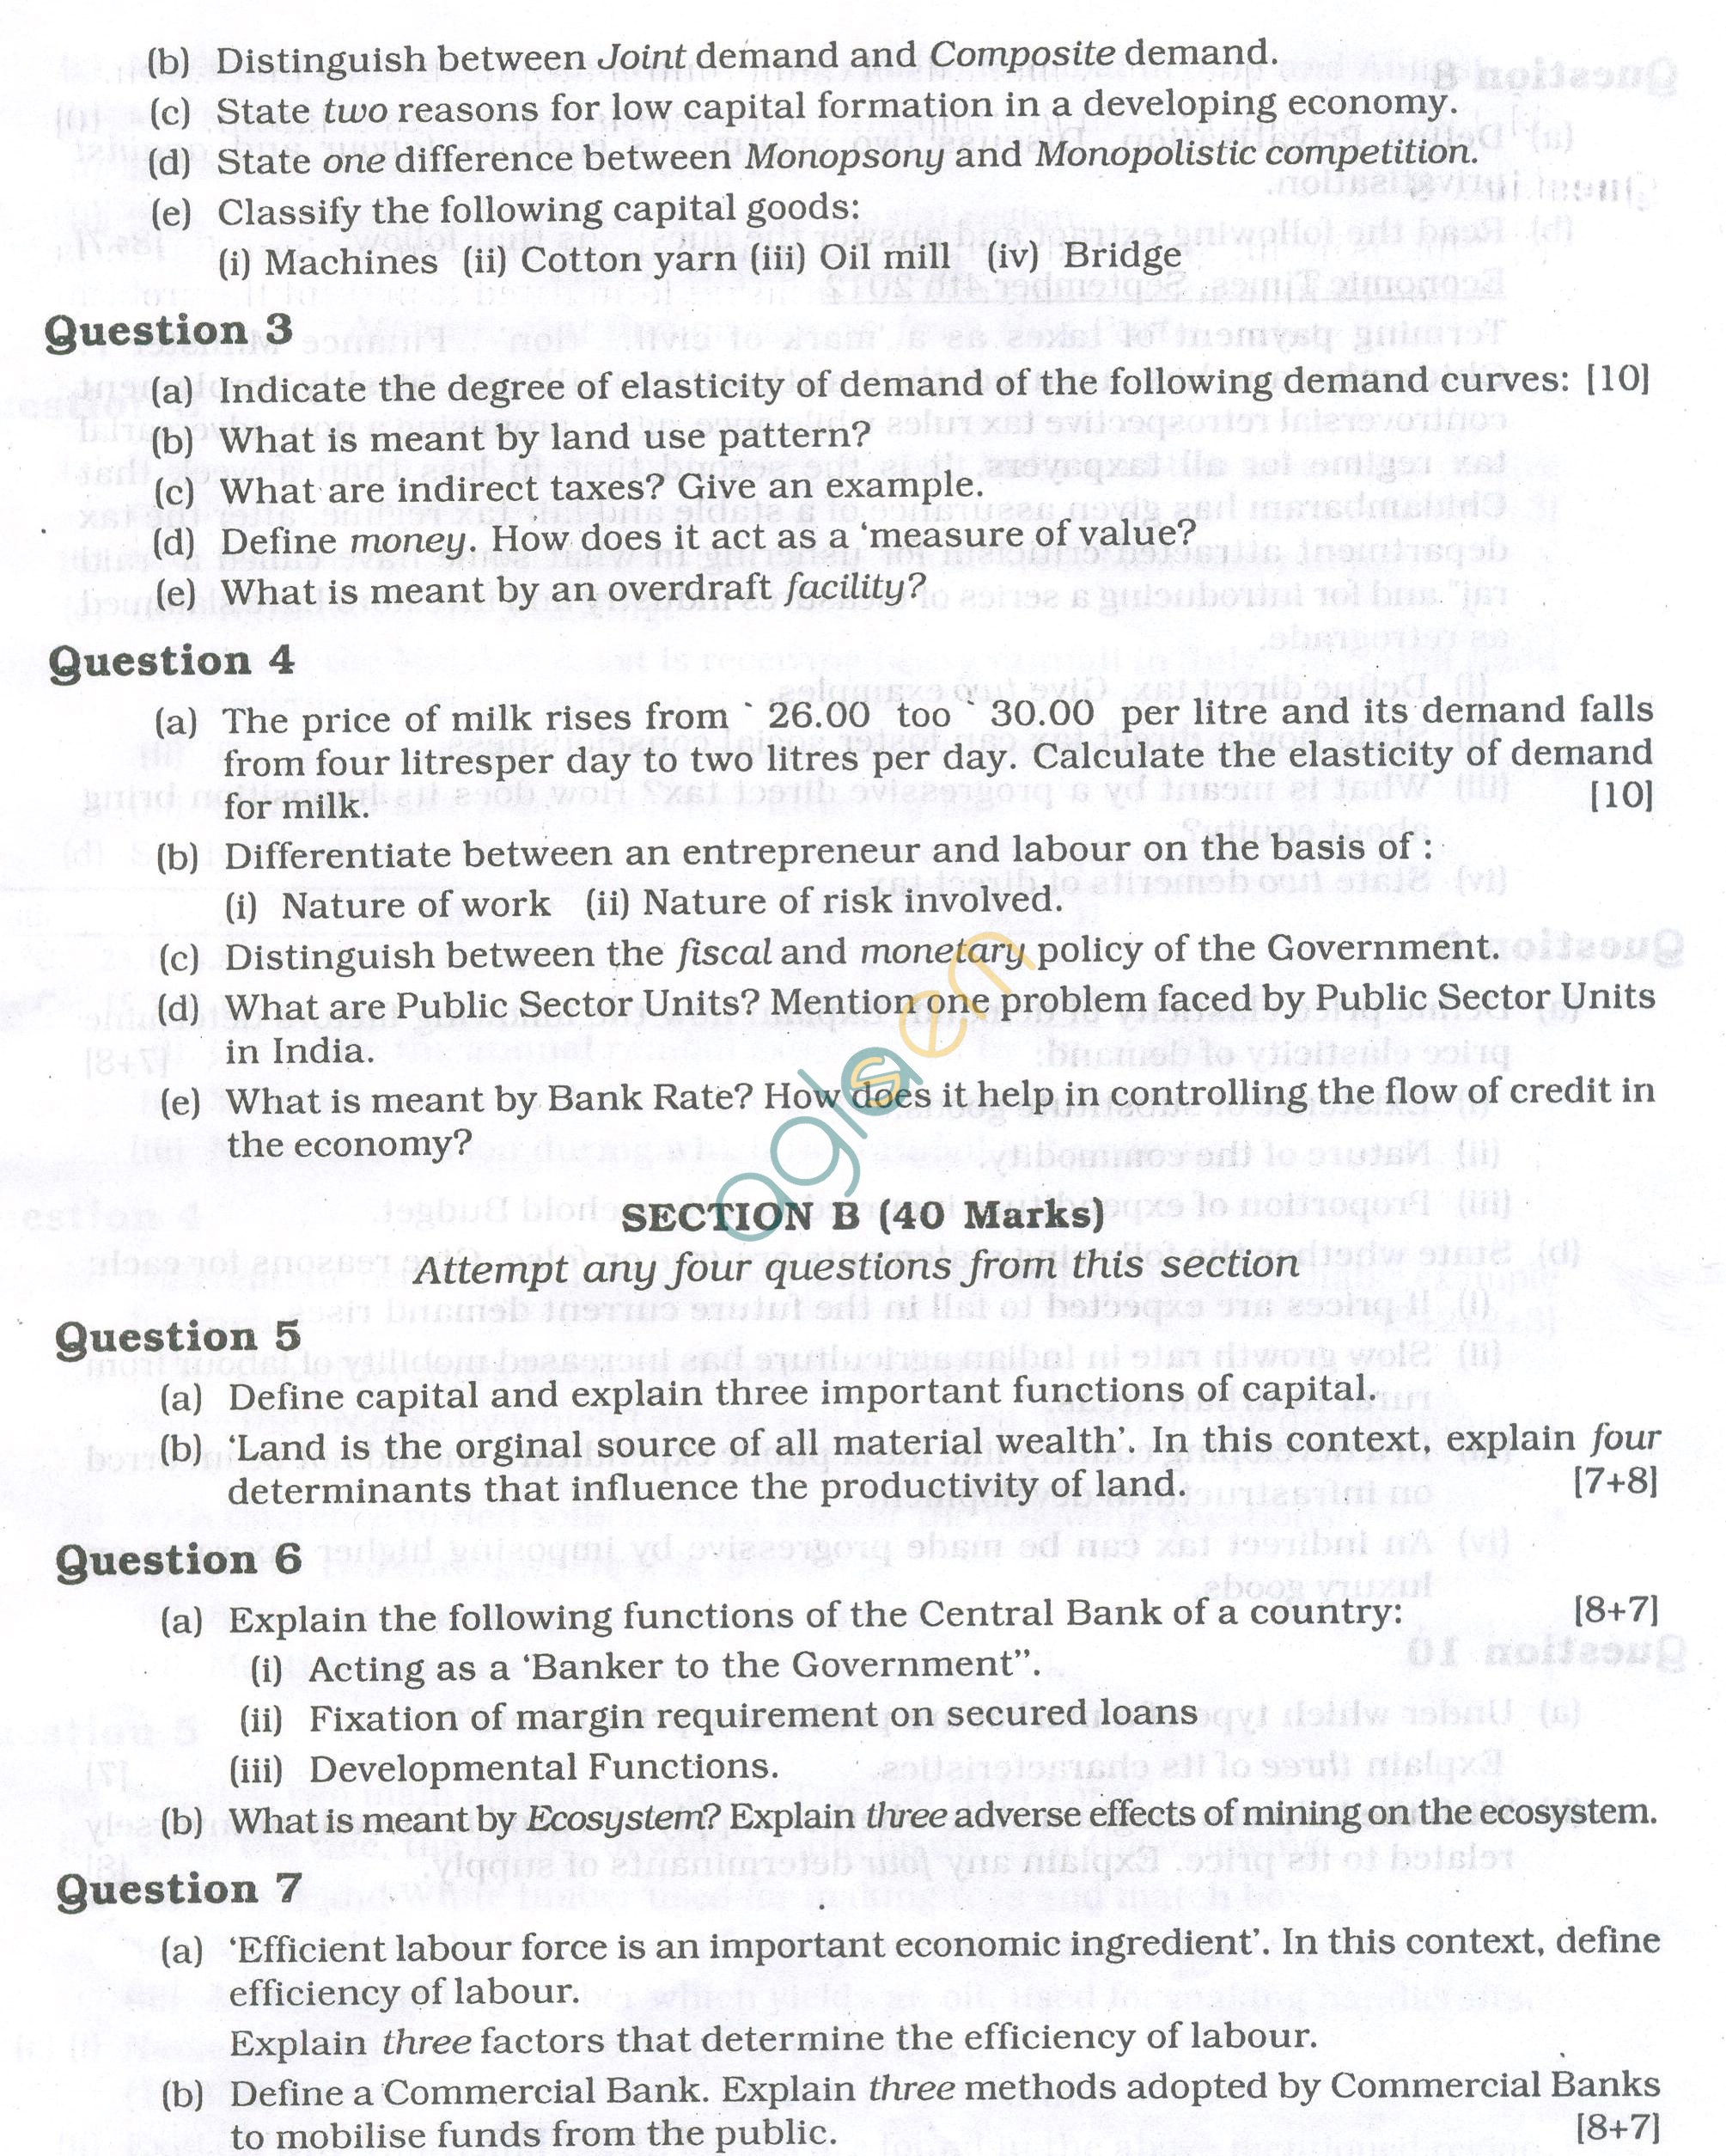 ICSE Question Papers 2013 for Class 10 - Economic Applications/